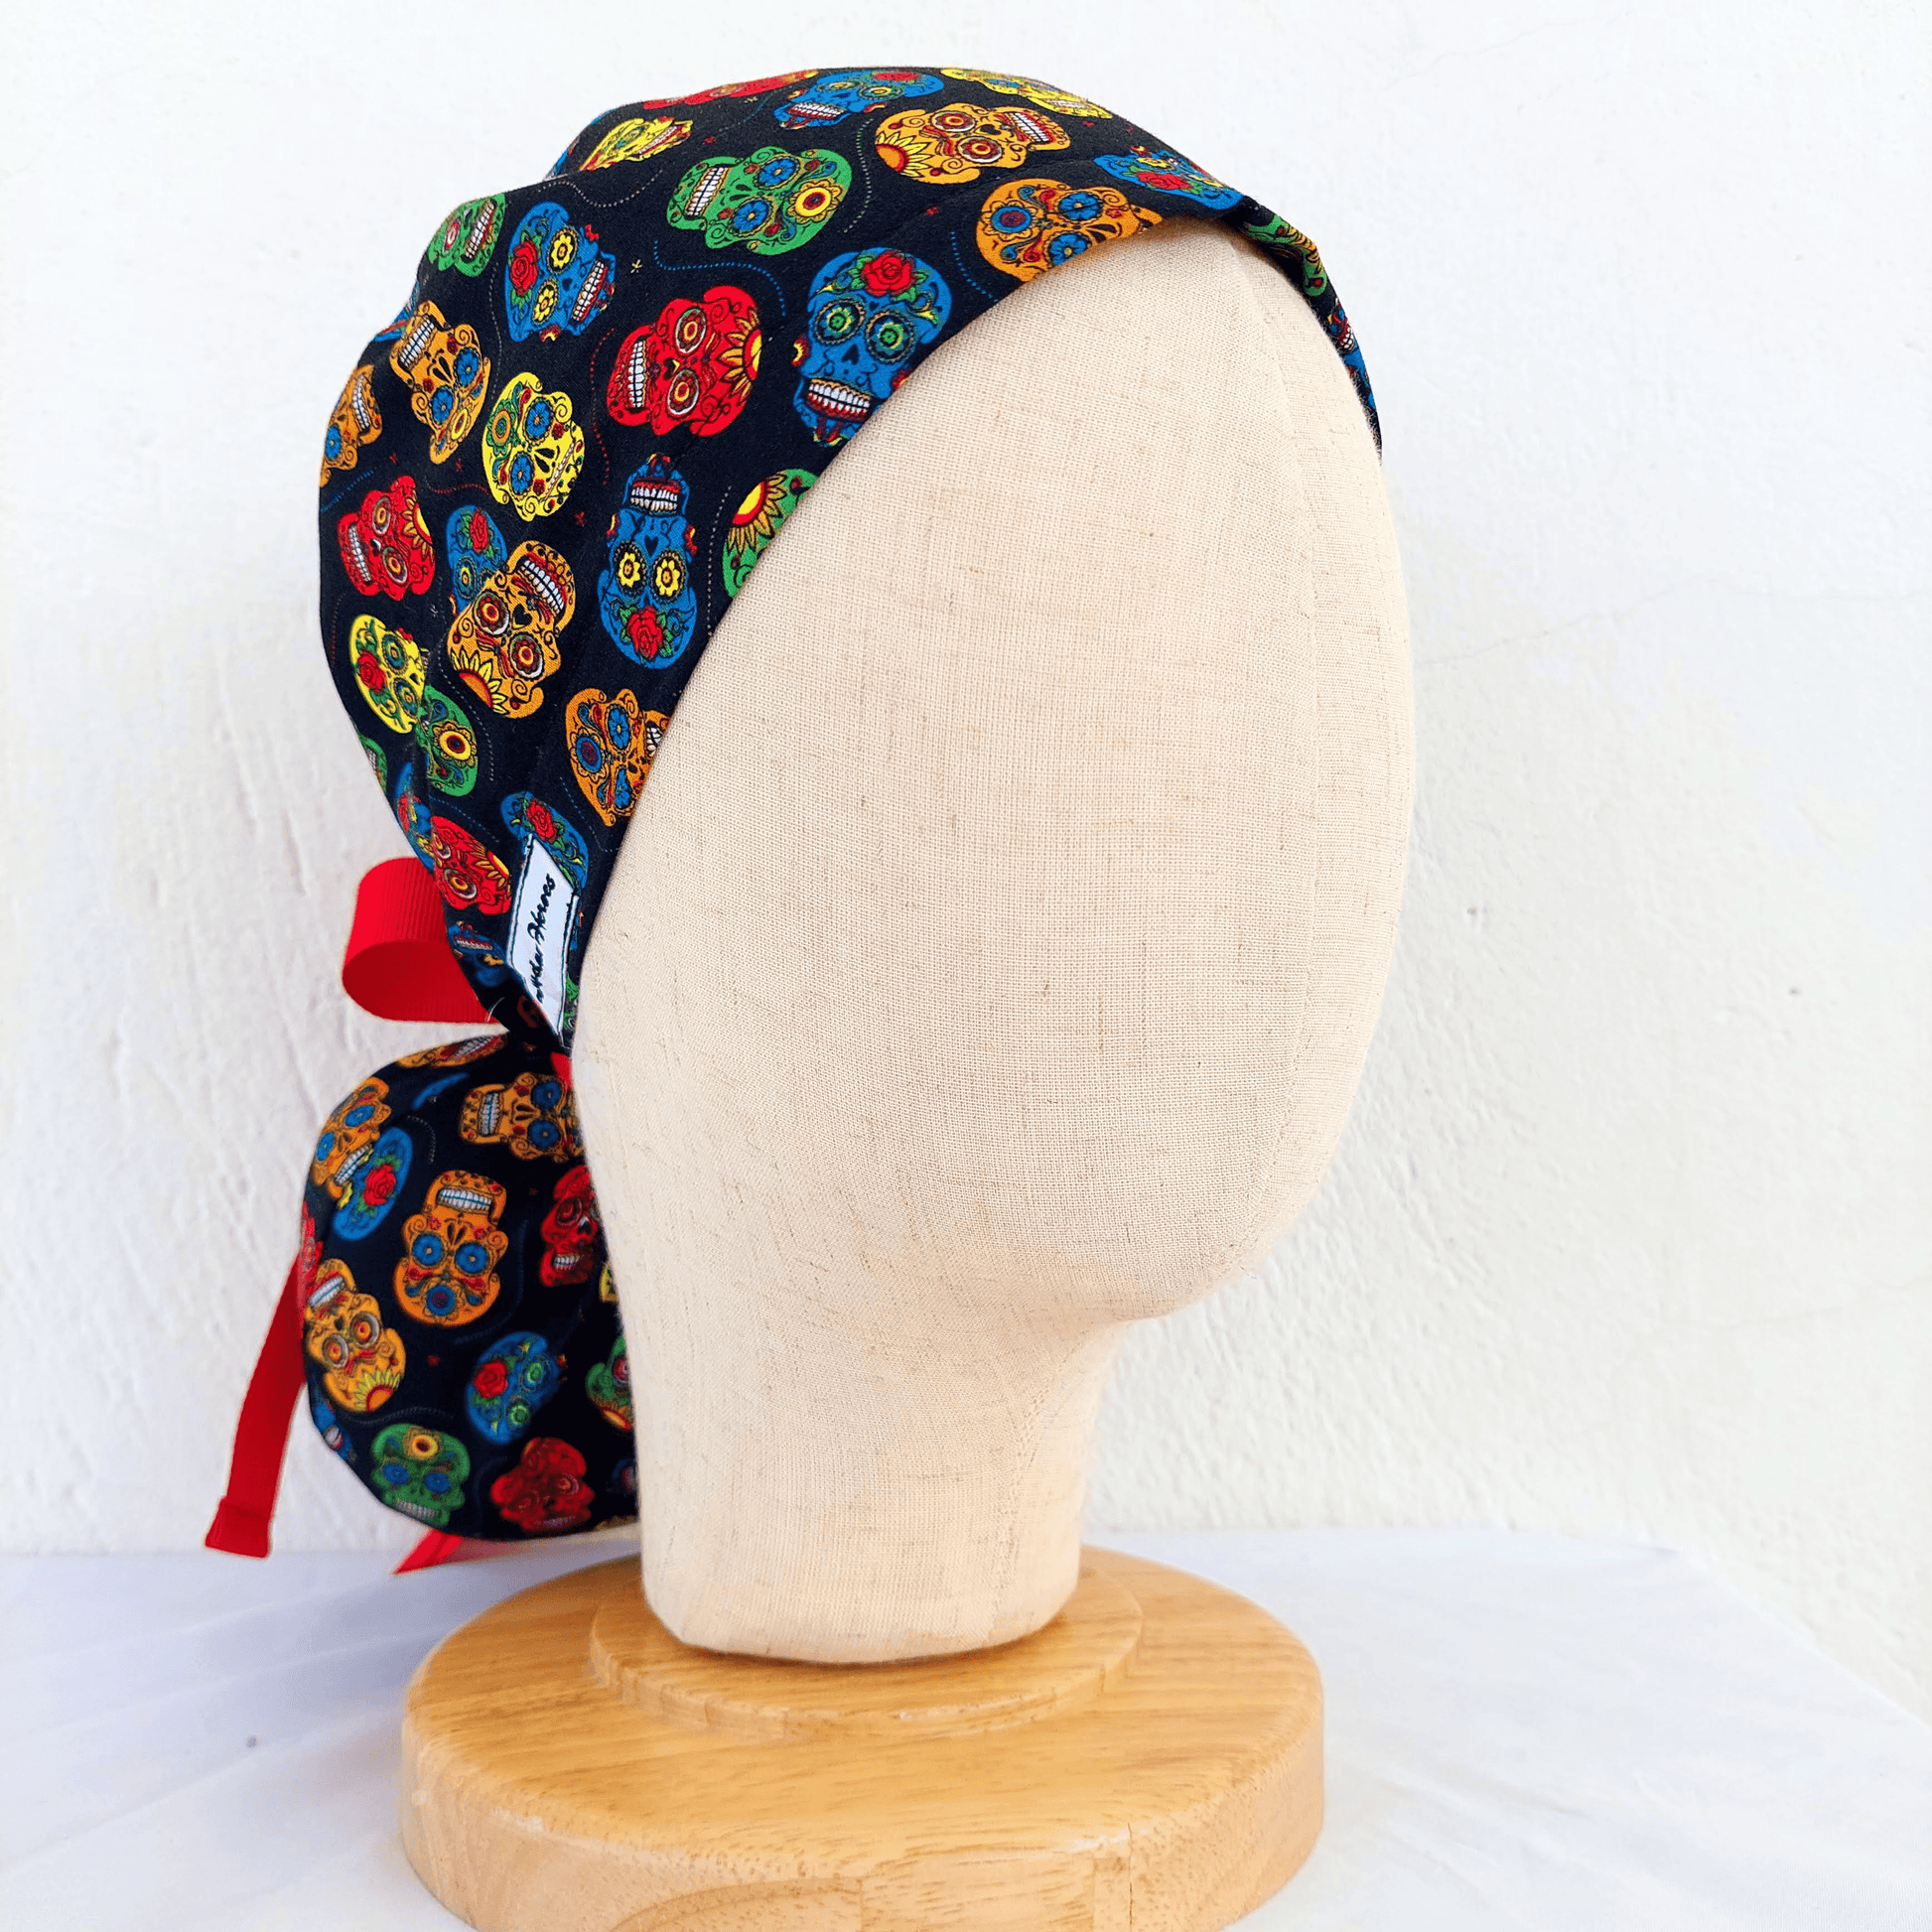 mannequin wearing a scrub cap ponytail with small colorful skulls and a separate pounch on it for the ponytail that hold the long hair and ties with red ribbons